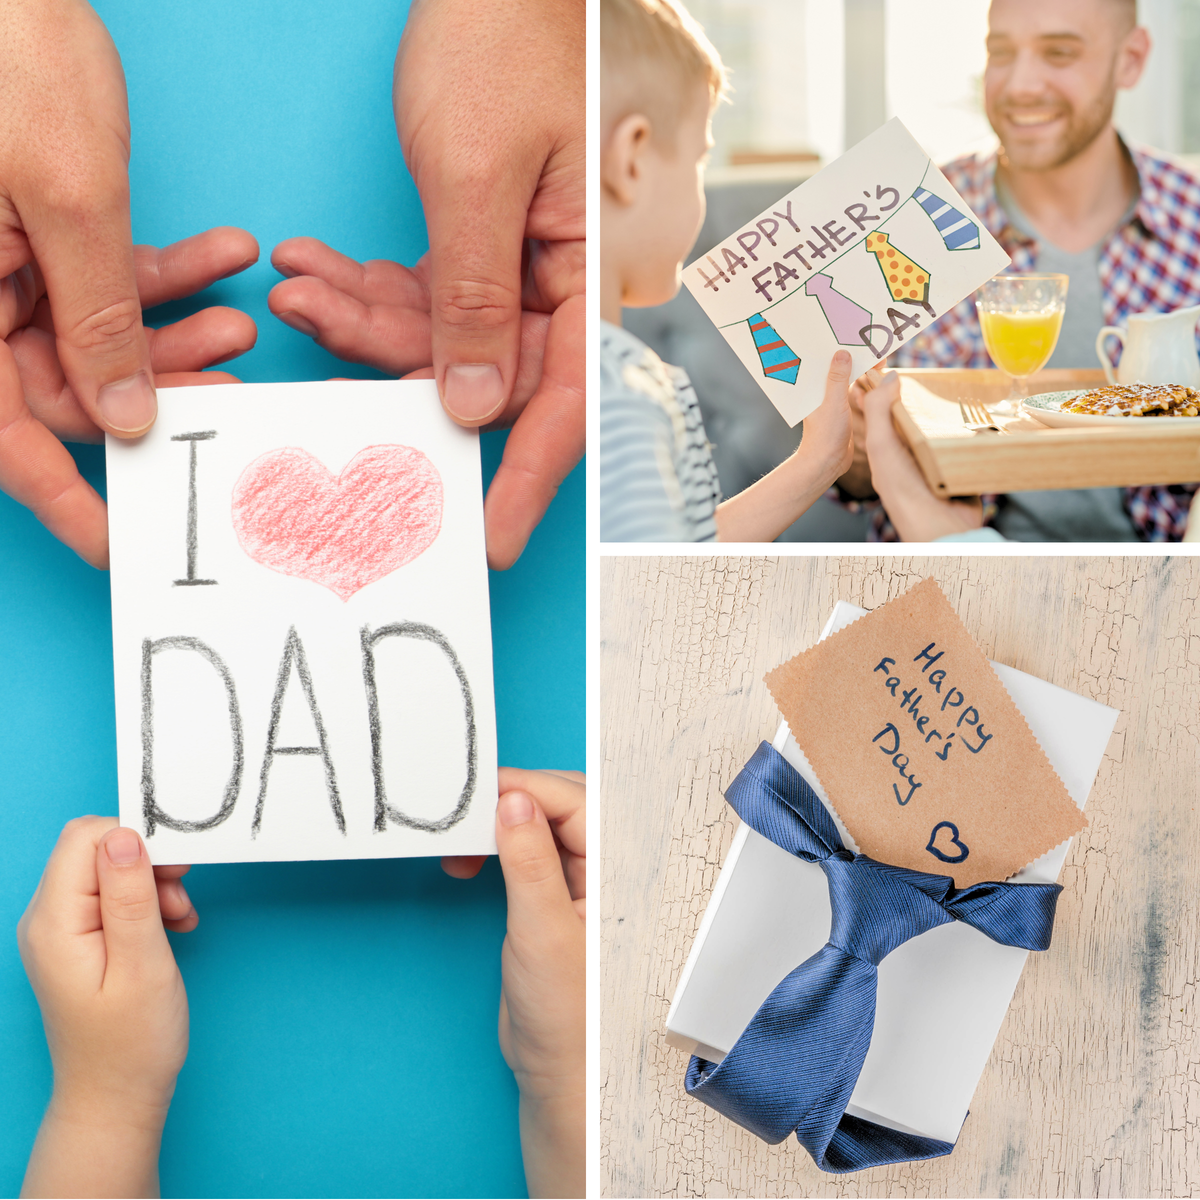 What Is The Most Bought Gift On Father's Day? You're a Card!